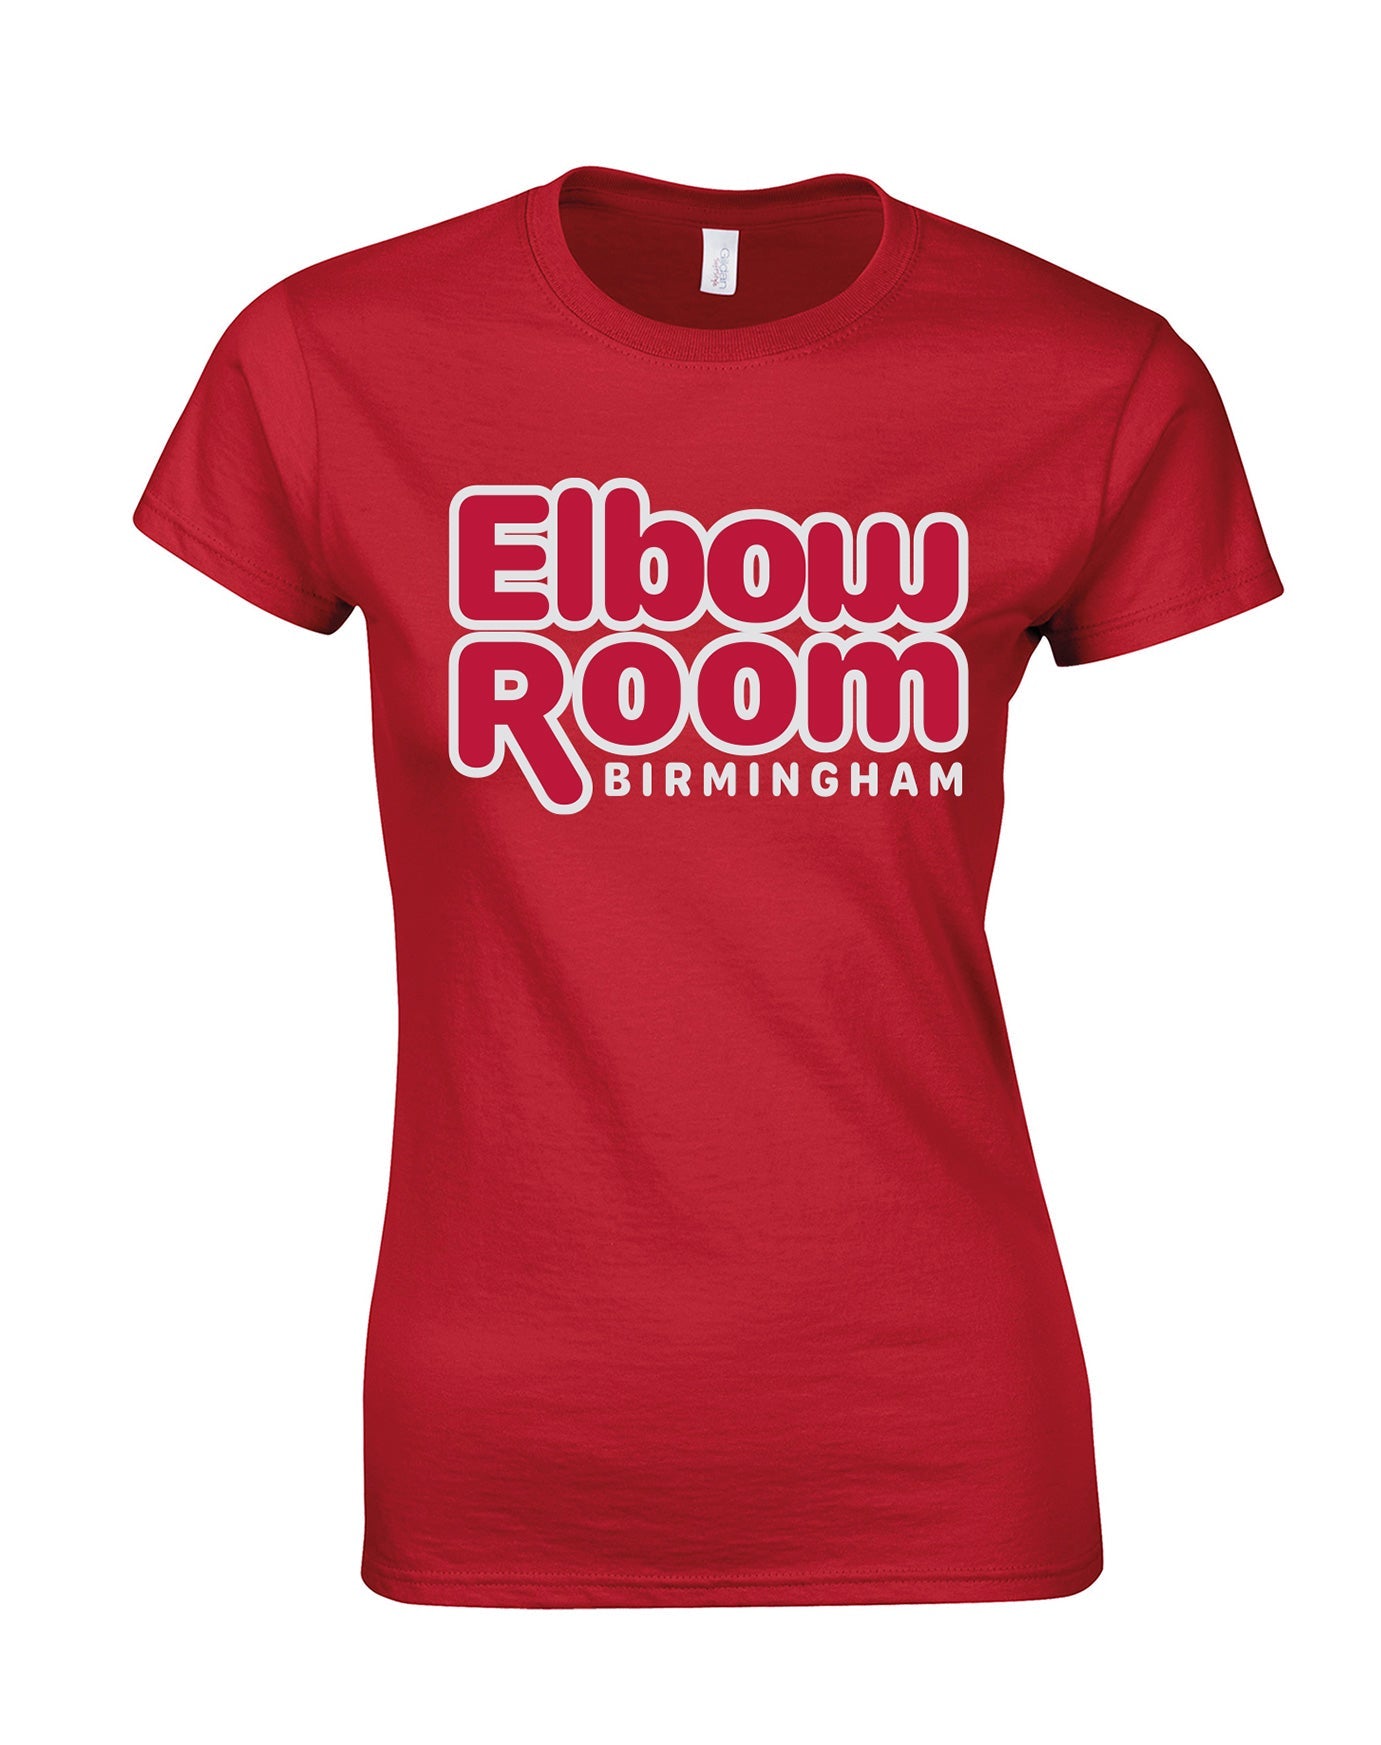 Elbow Room ladies fit T-shirt - various colours - Dirty Stop Outs